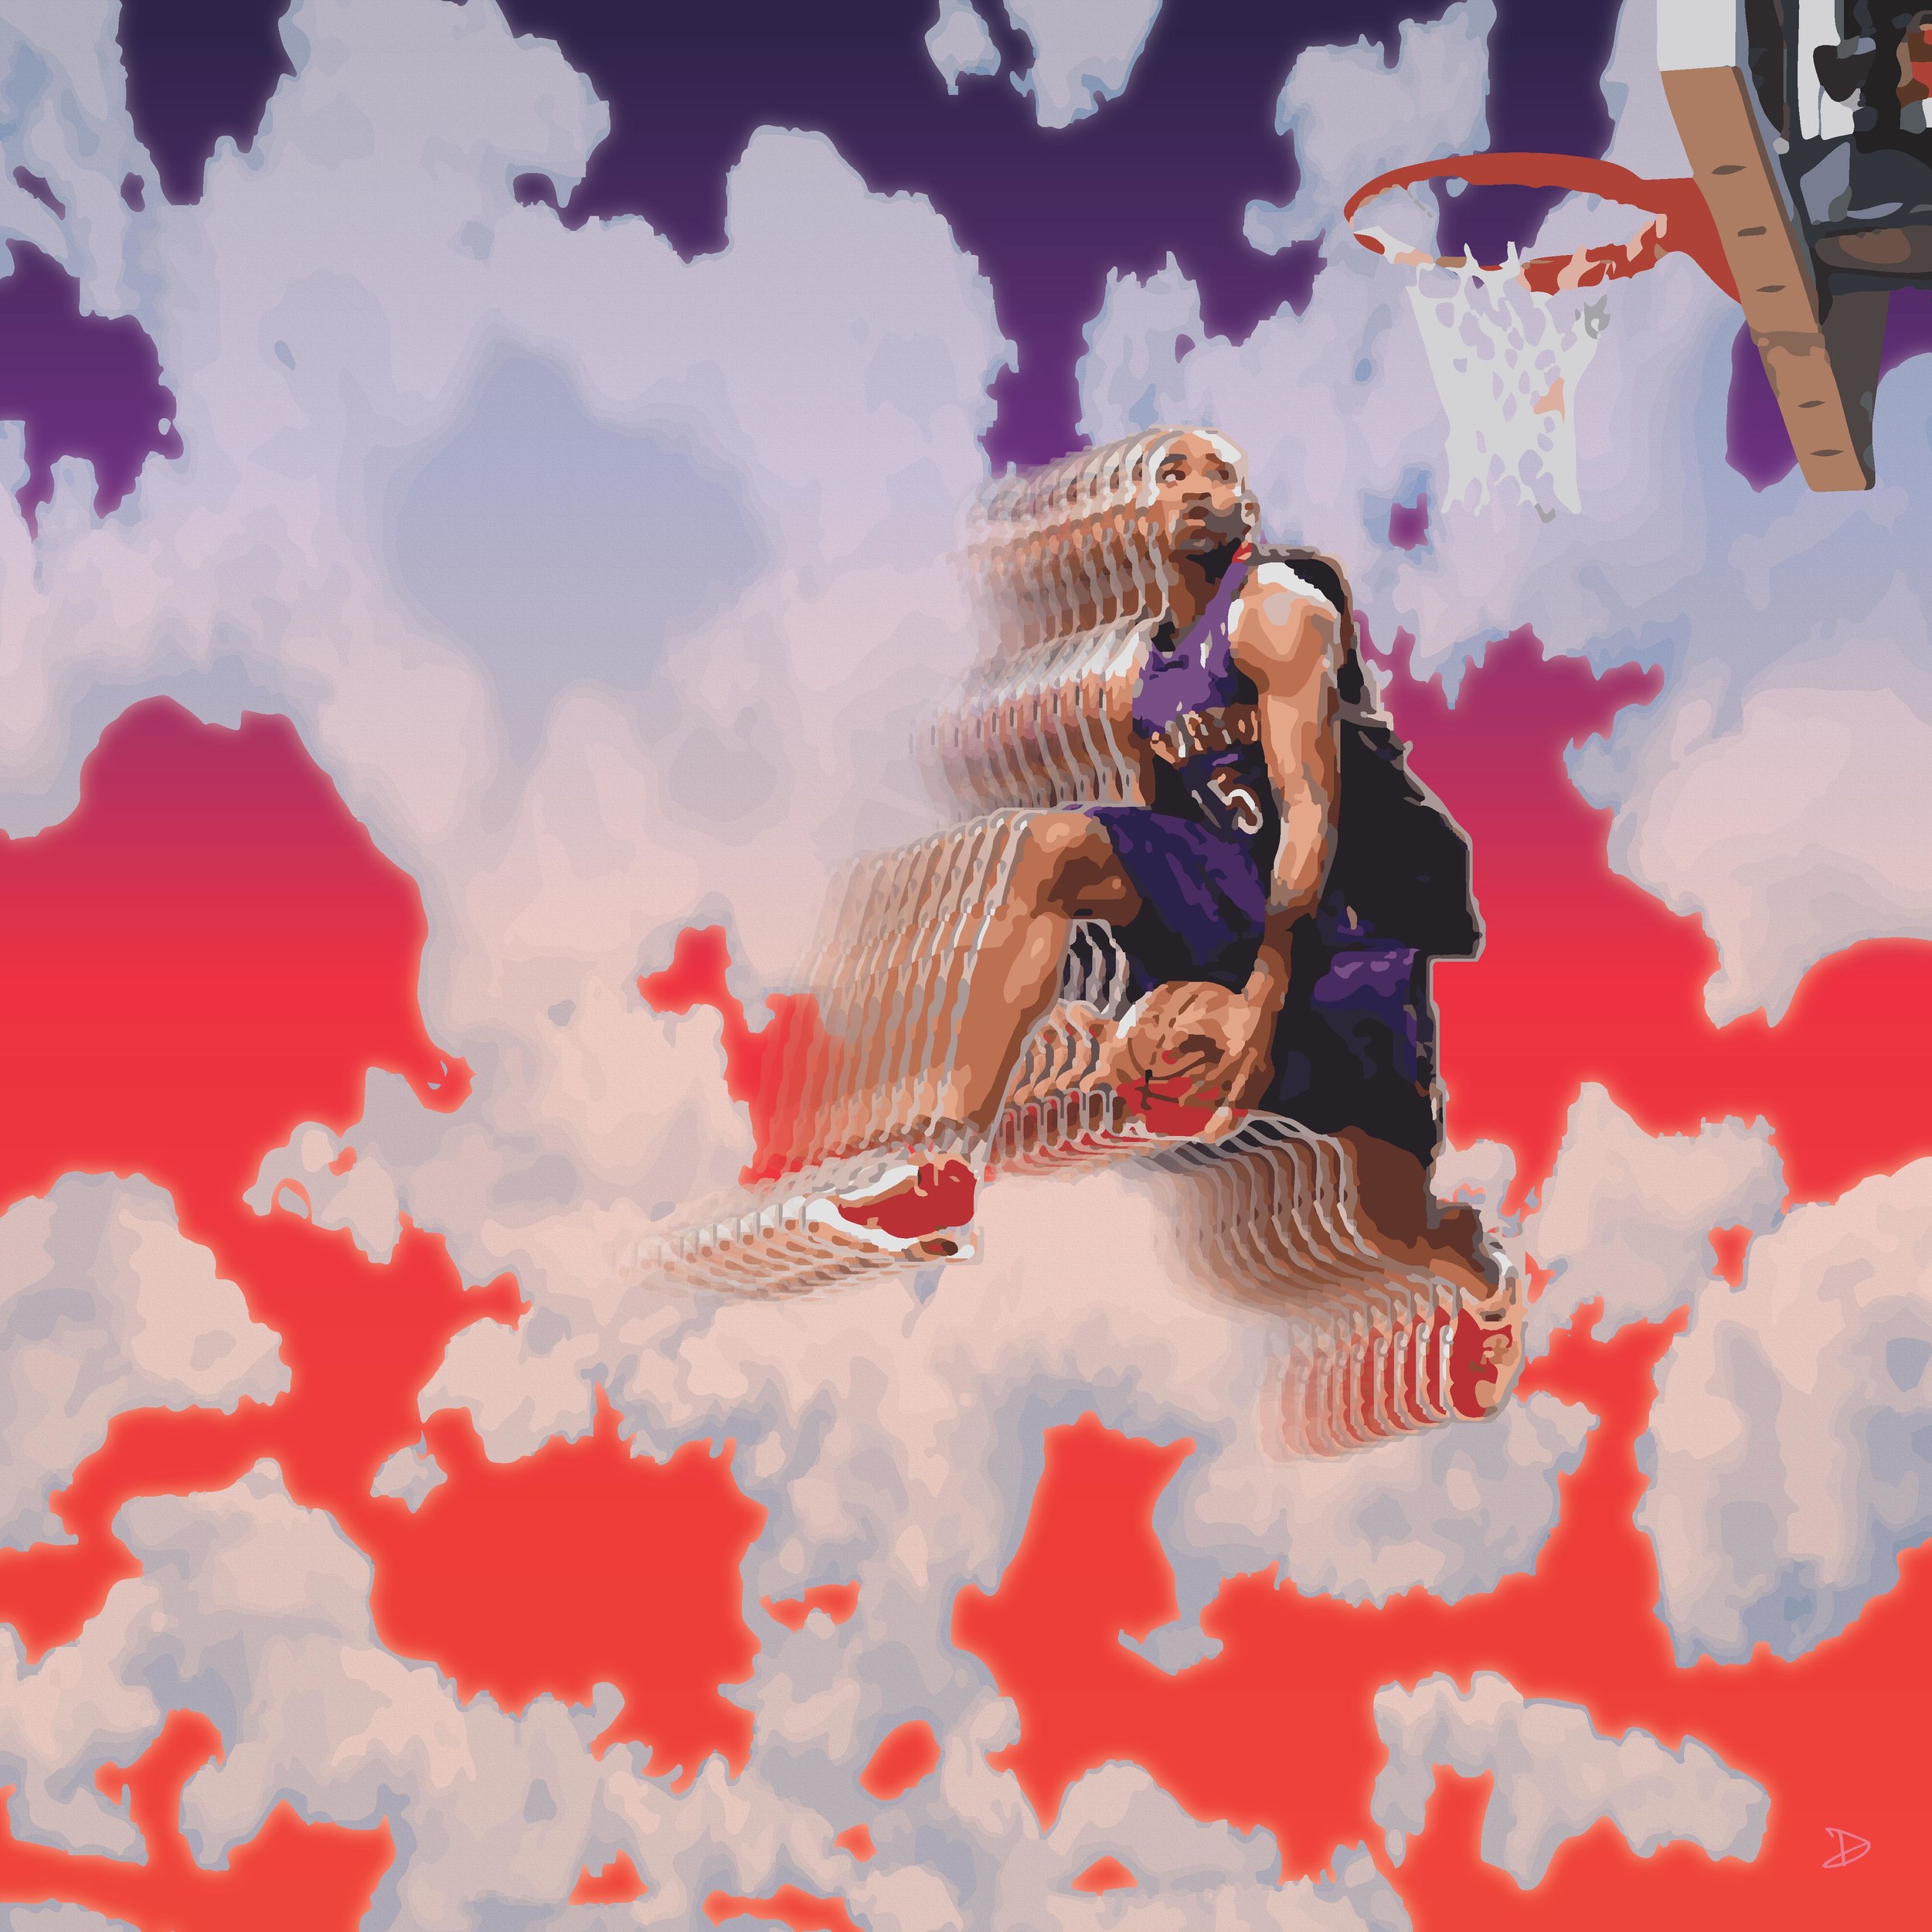 vince dunk-page-001.jpg